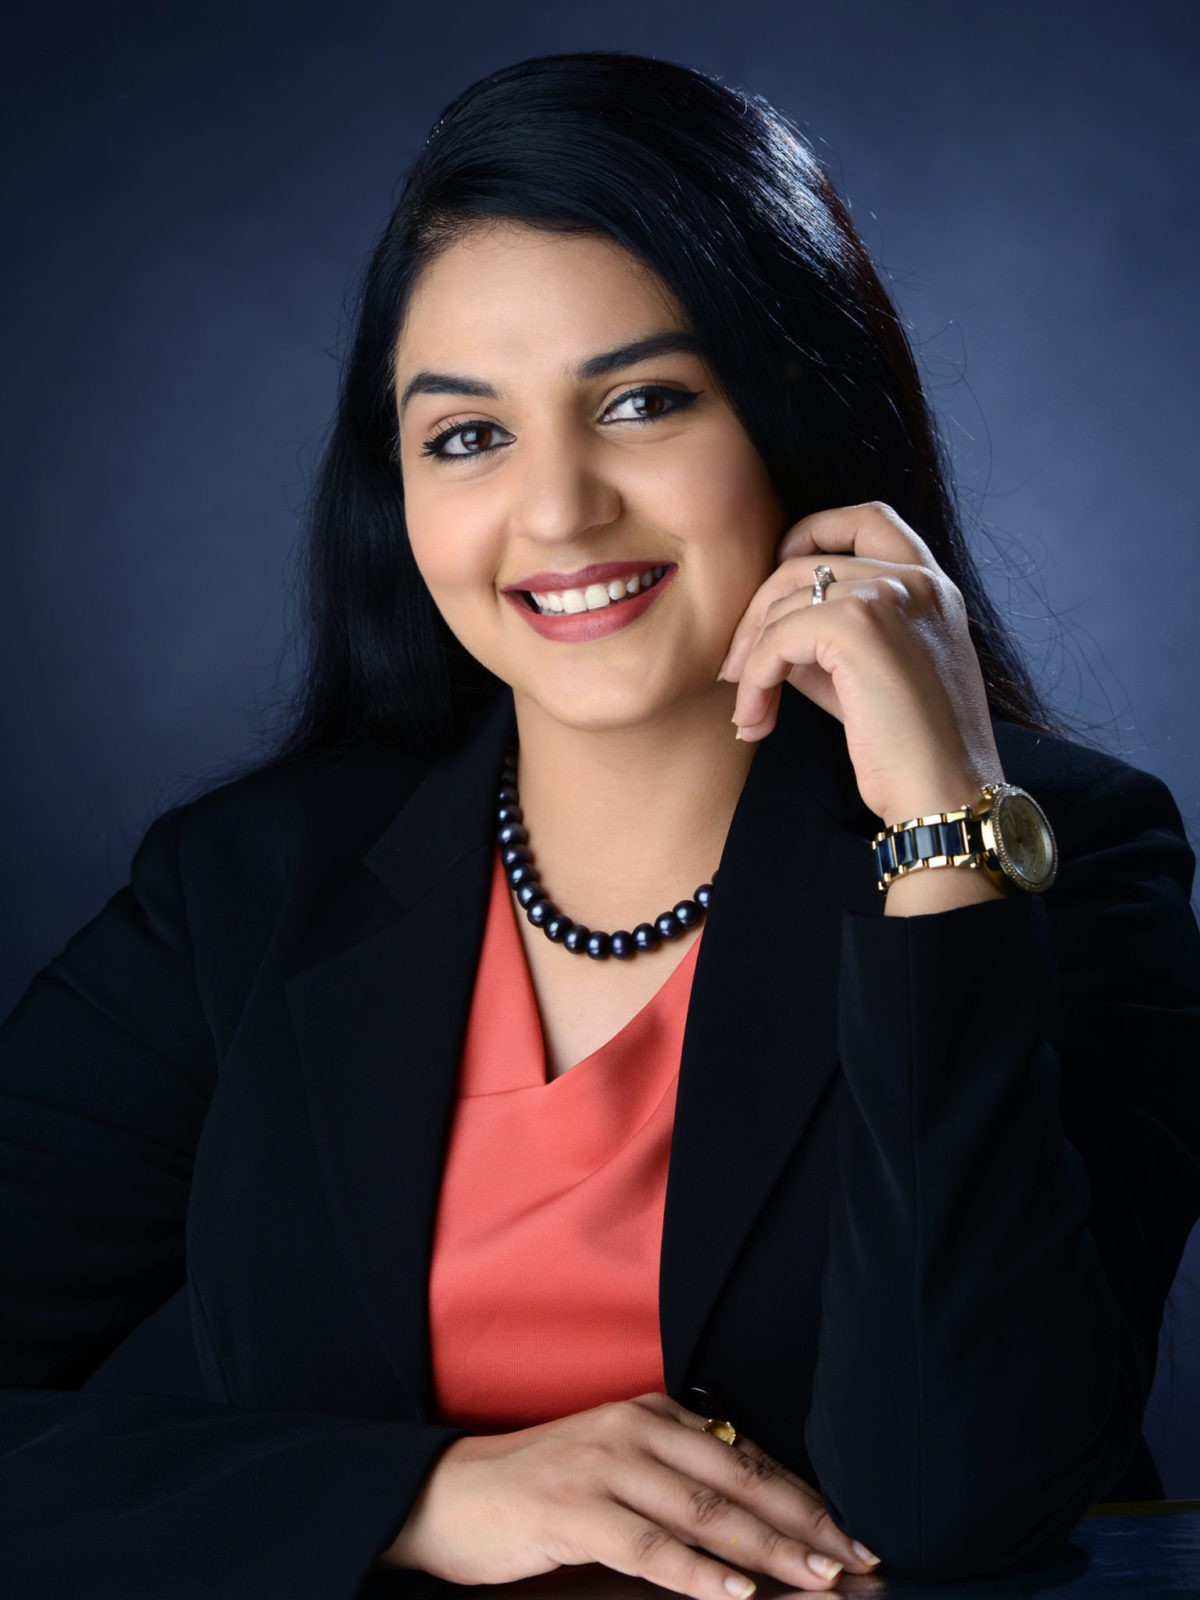 educational-sector-gets-inter-sectorial-connectivity-with-a-large-number-of-stakeholders-coming-in-by-sonia-dubey-dewan-founder-038-executive-director-isim